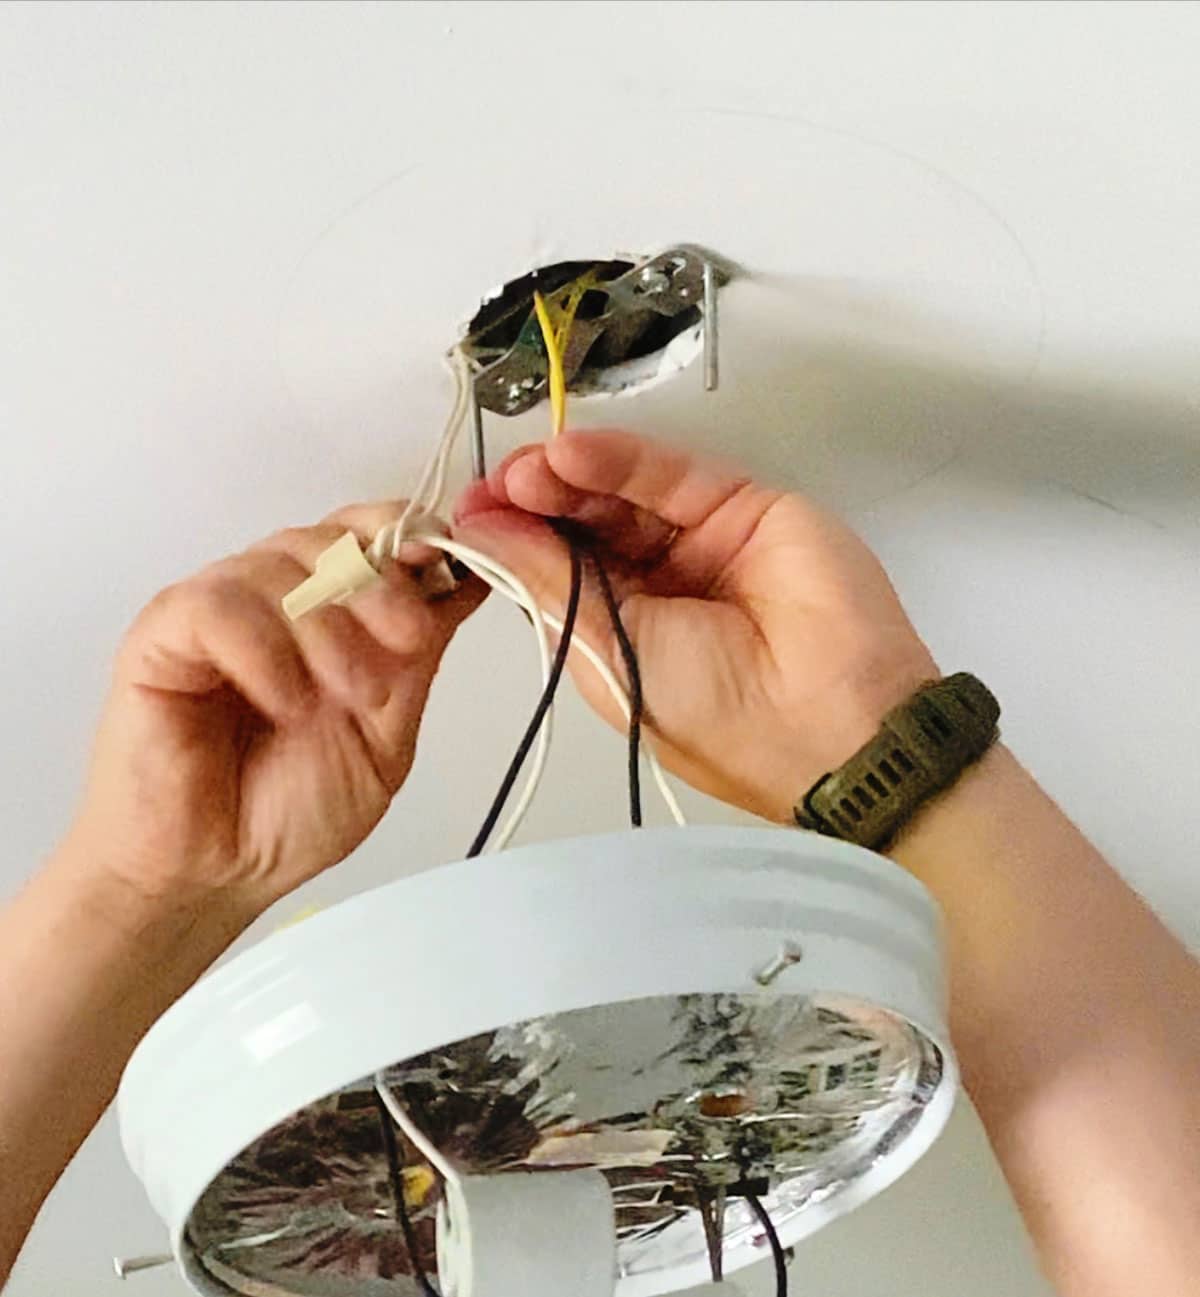 How To Change A Ceiling Light Fixture - turn power off and undo the old wiring